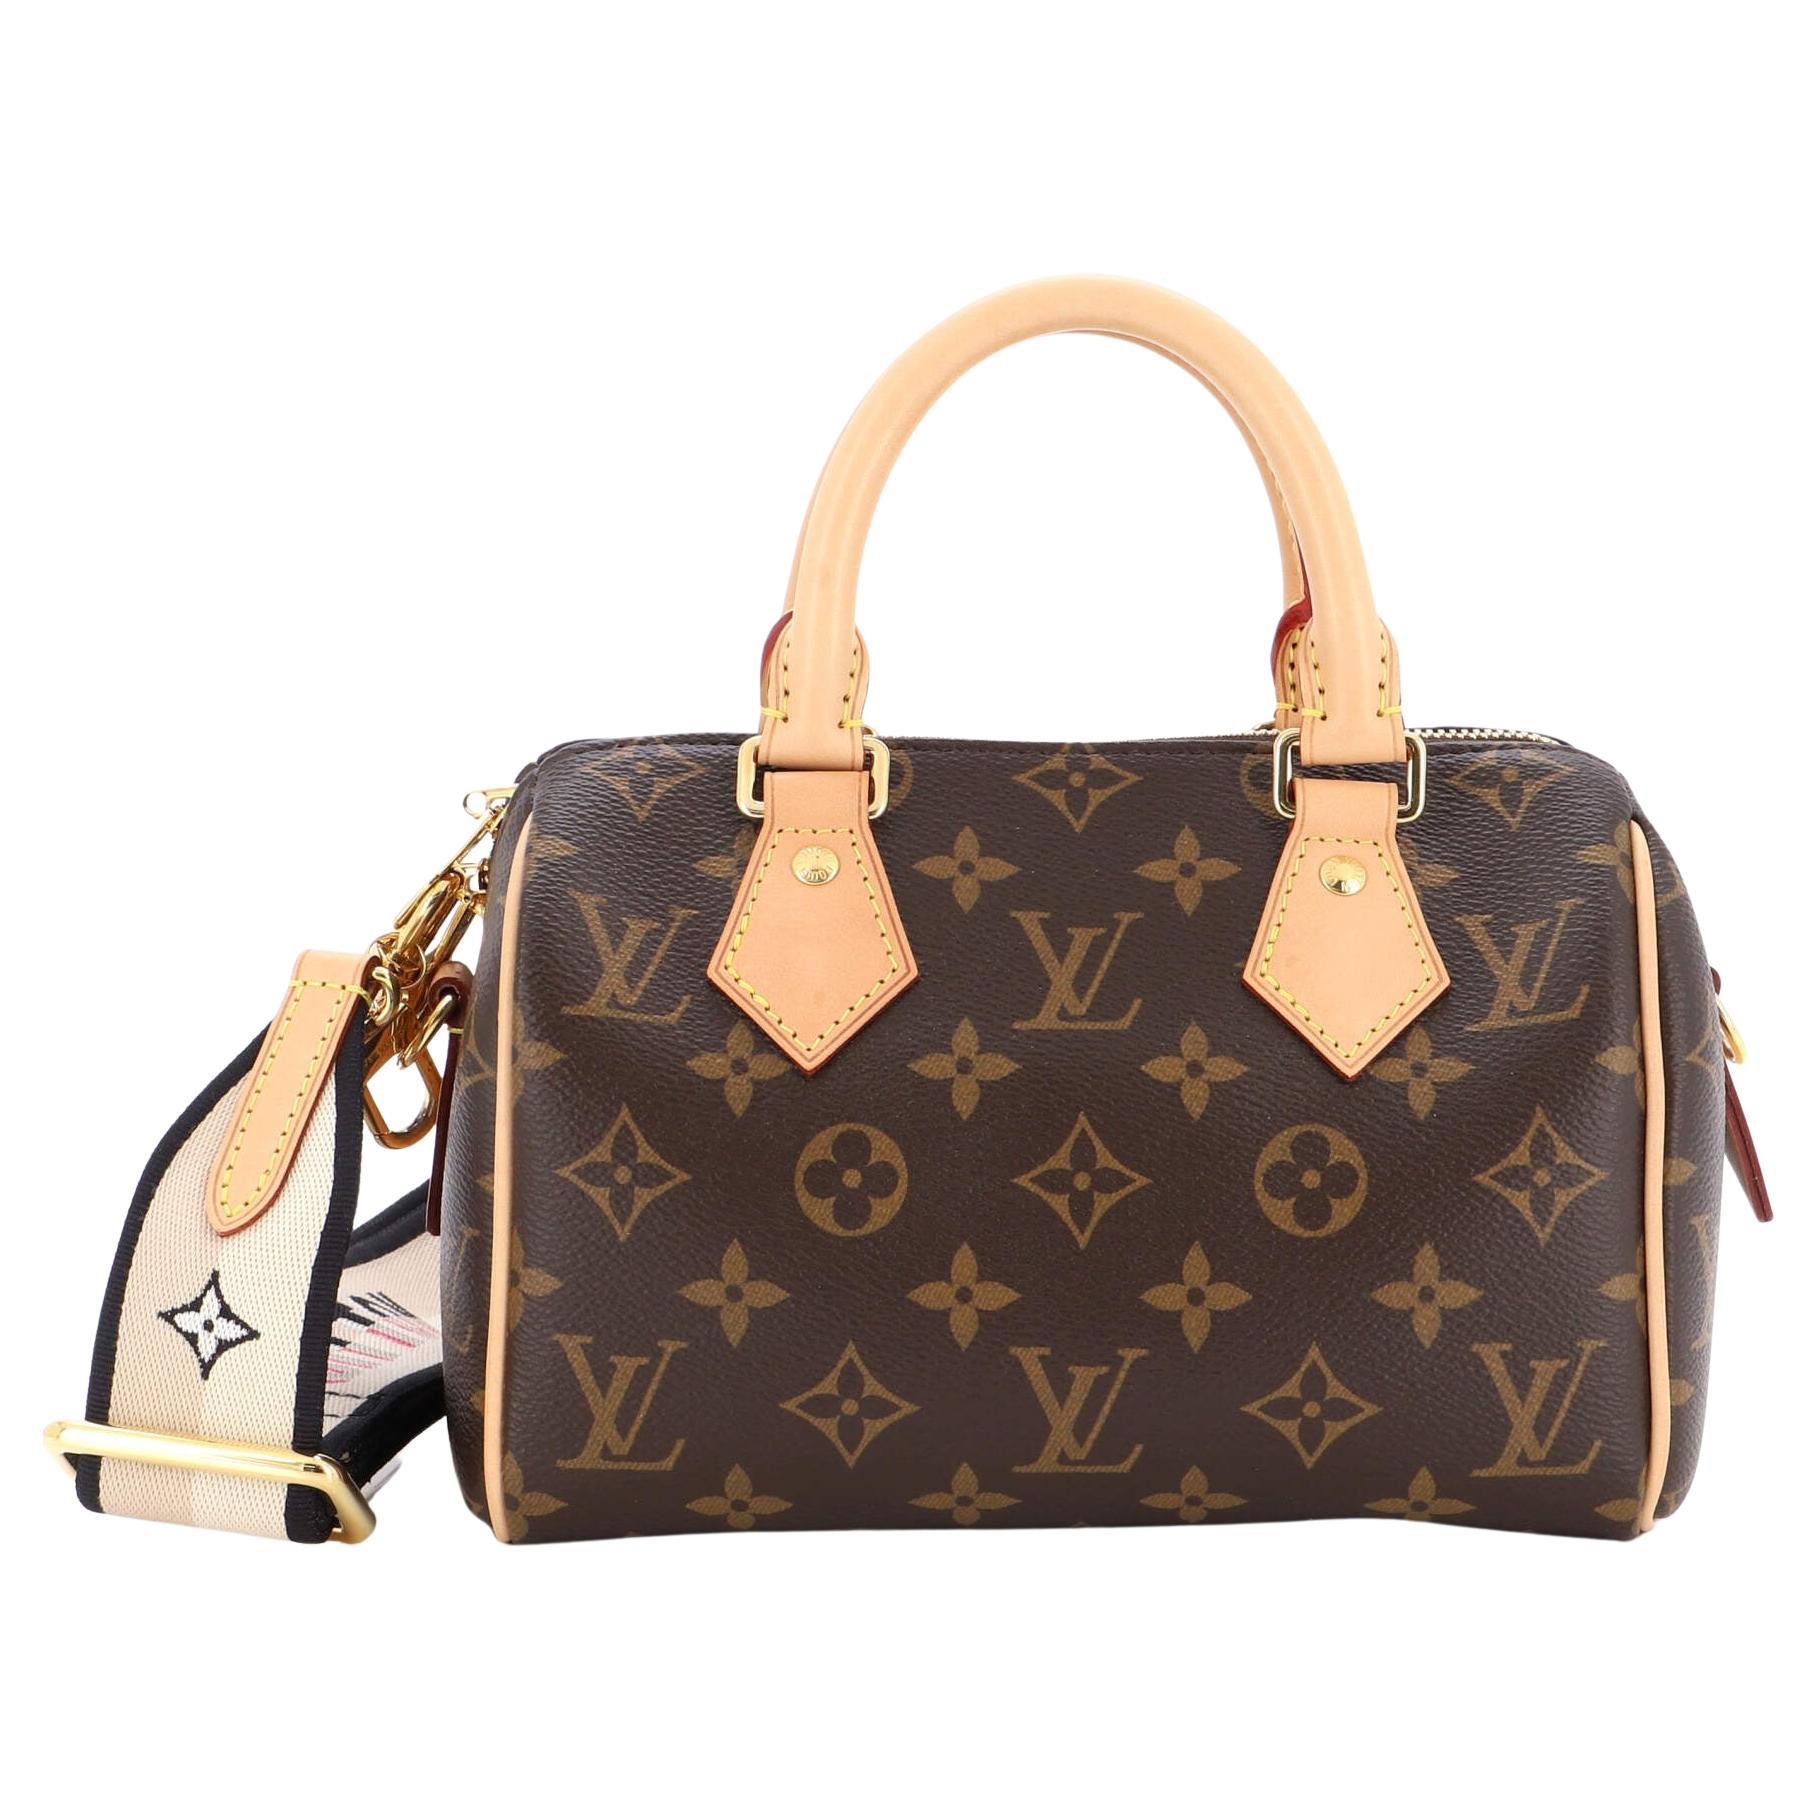 Outfit ideas - How to wear What Goes Around Comes Around Louis Vuitton  Monogram Speedy 30 Bag - WEAR